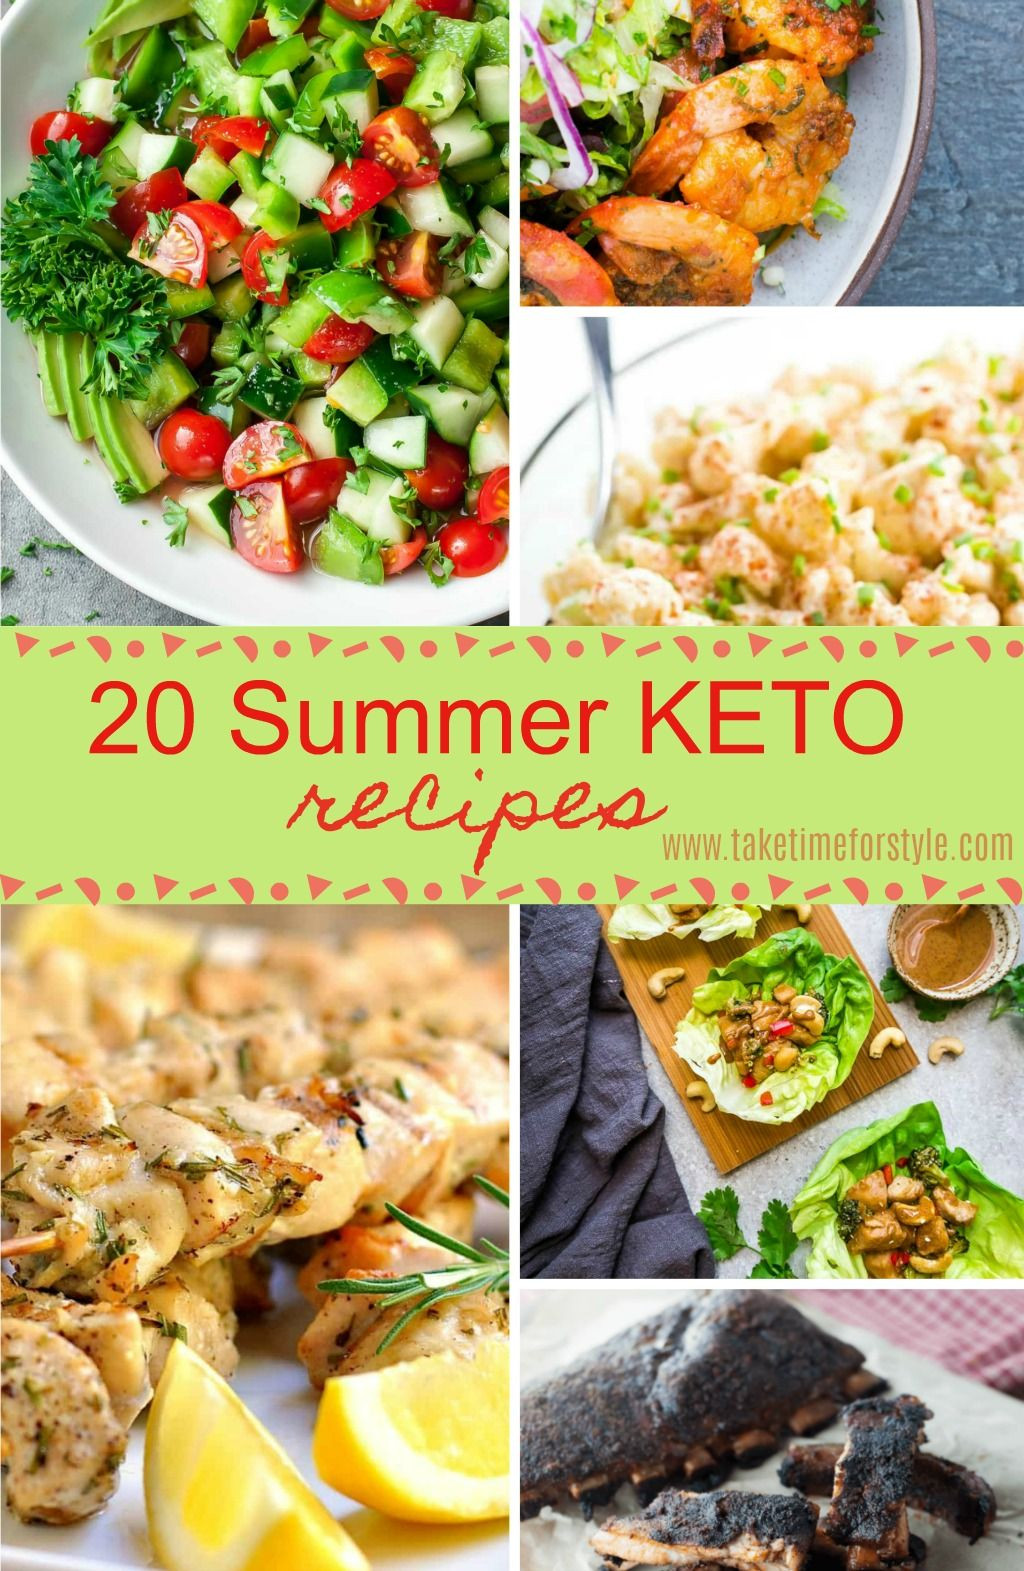 Summer Keto Appetizers
 There are 20 summer keto recipes here from keto main